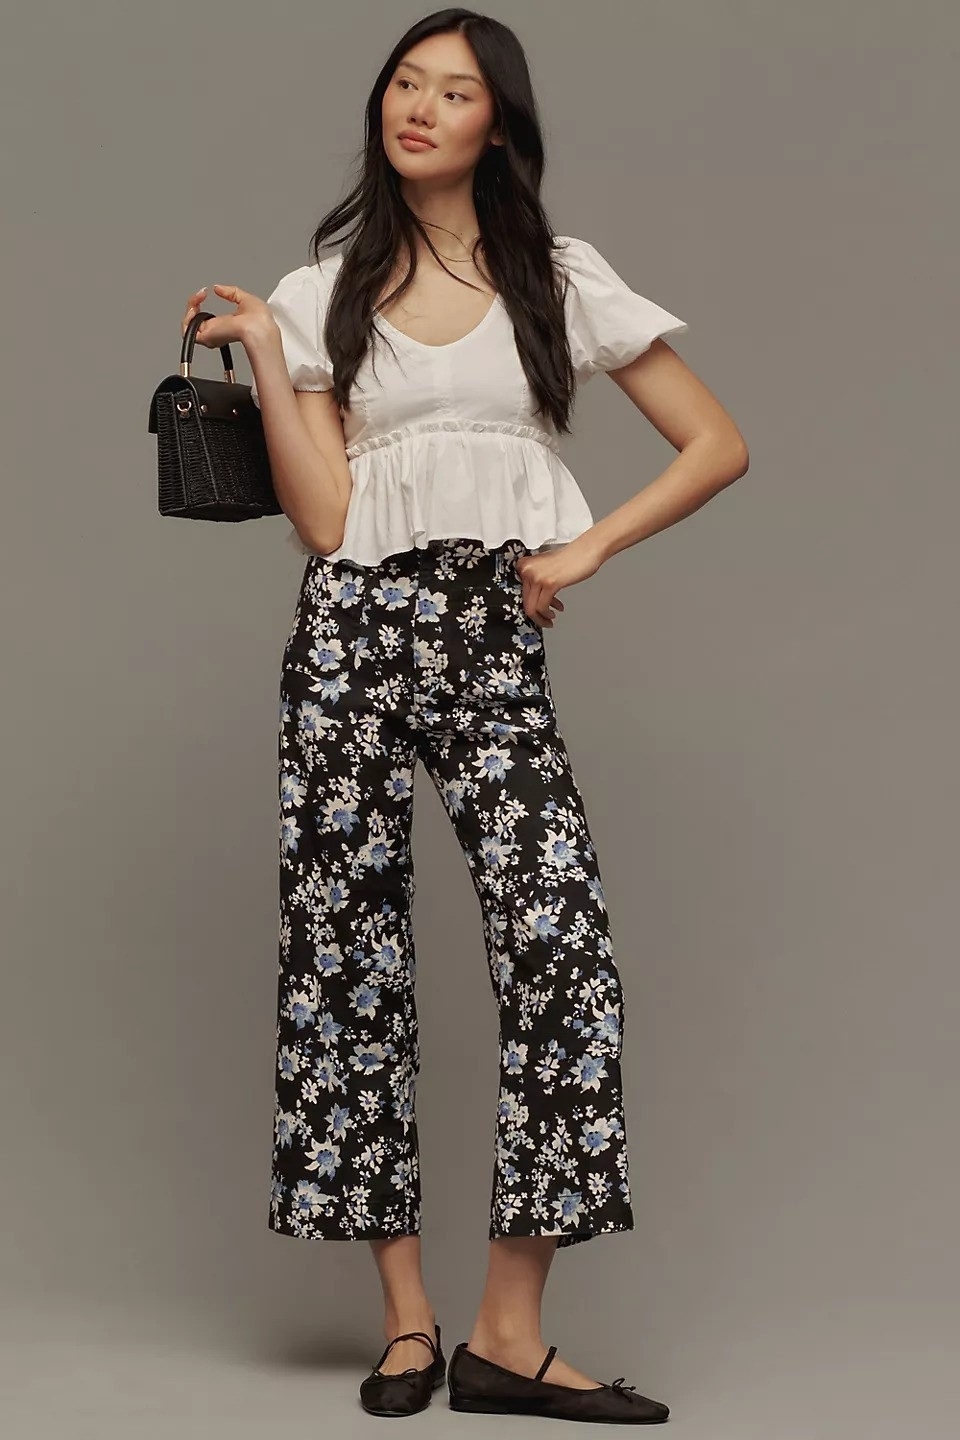 Woman posing in a ruffled white blouse, floral pants, and black flats, holding a small purse